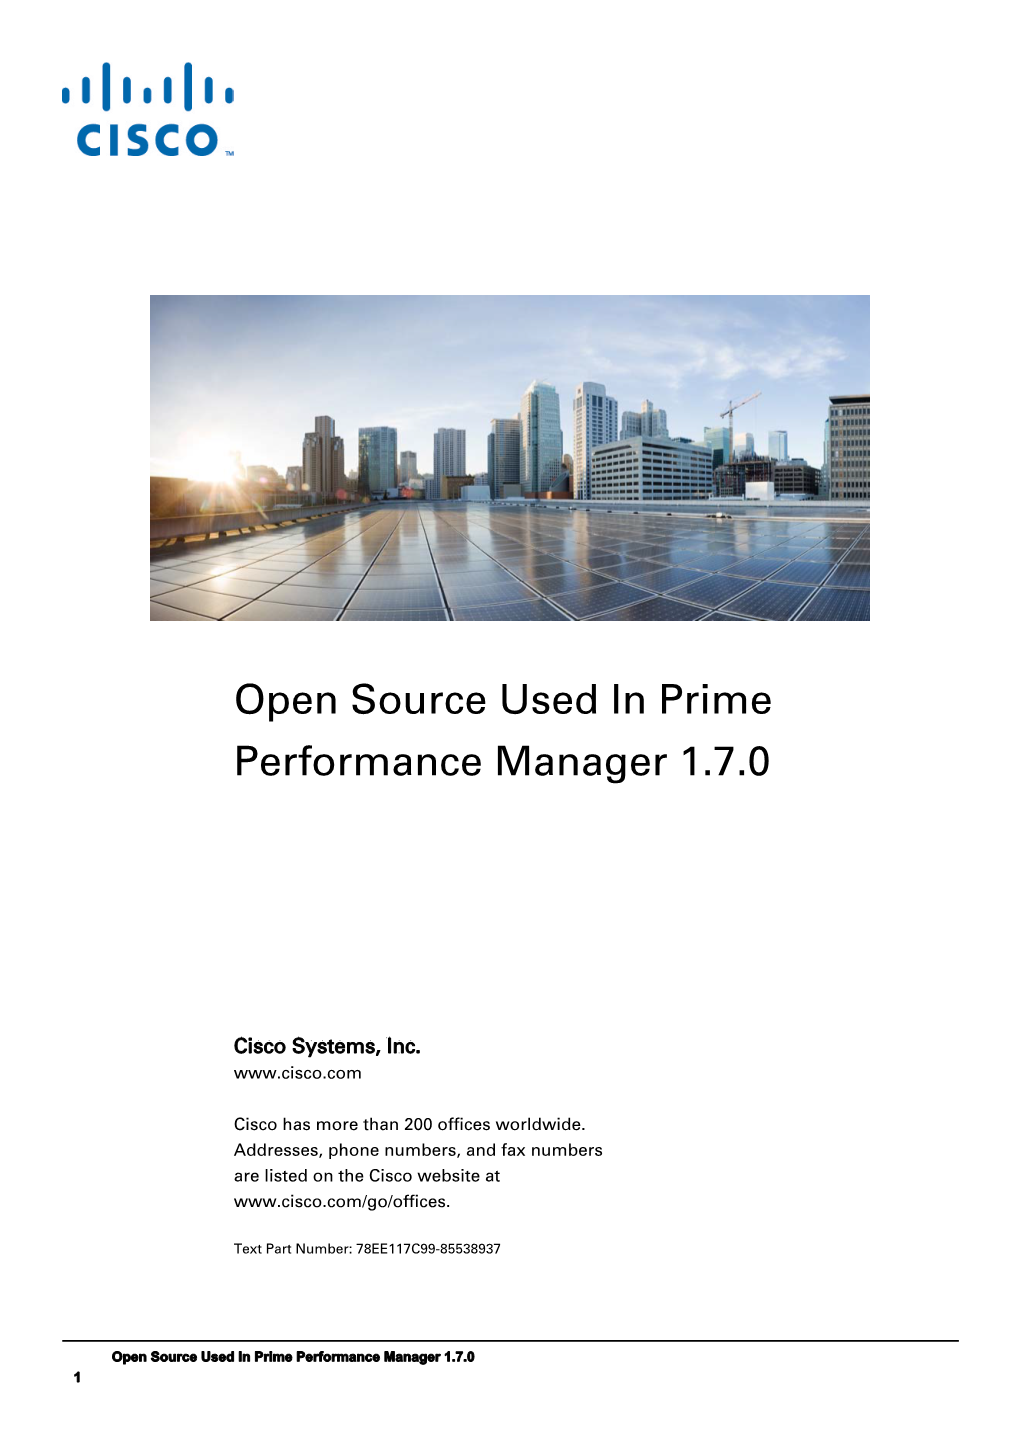 Open Source for Cisco Prime Performance Manager